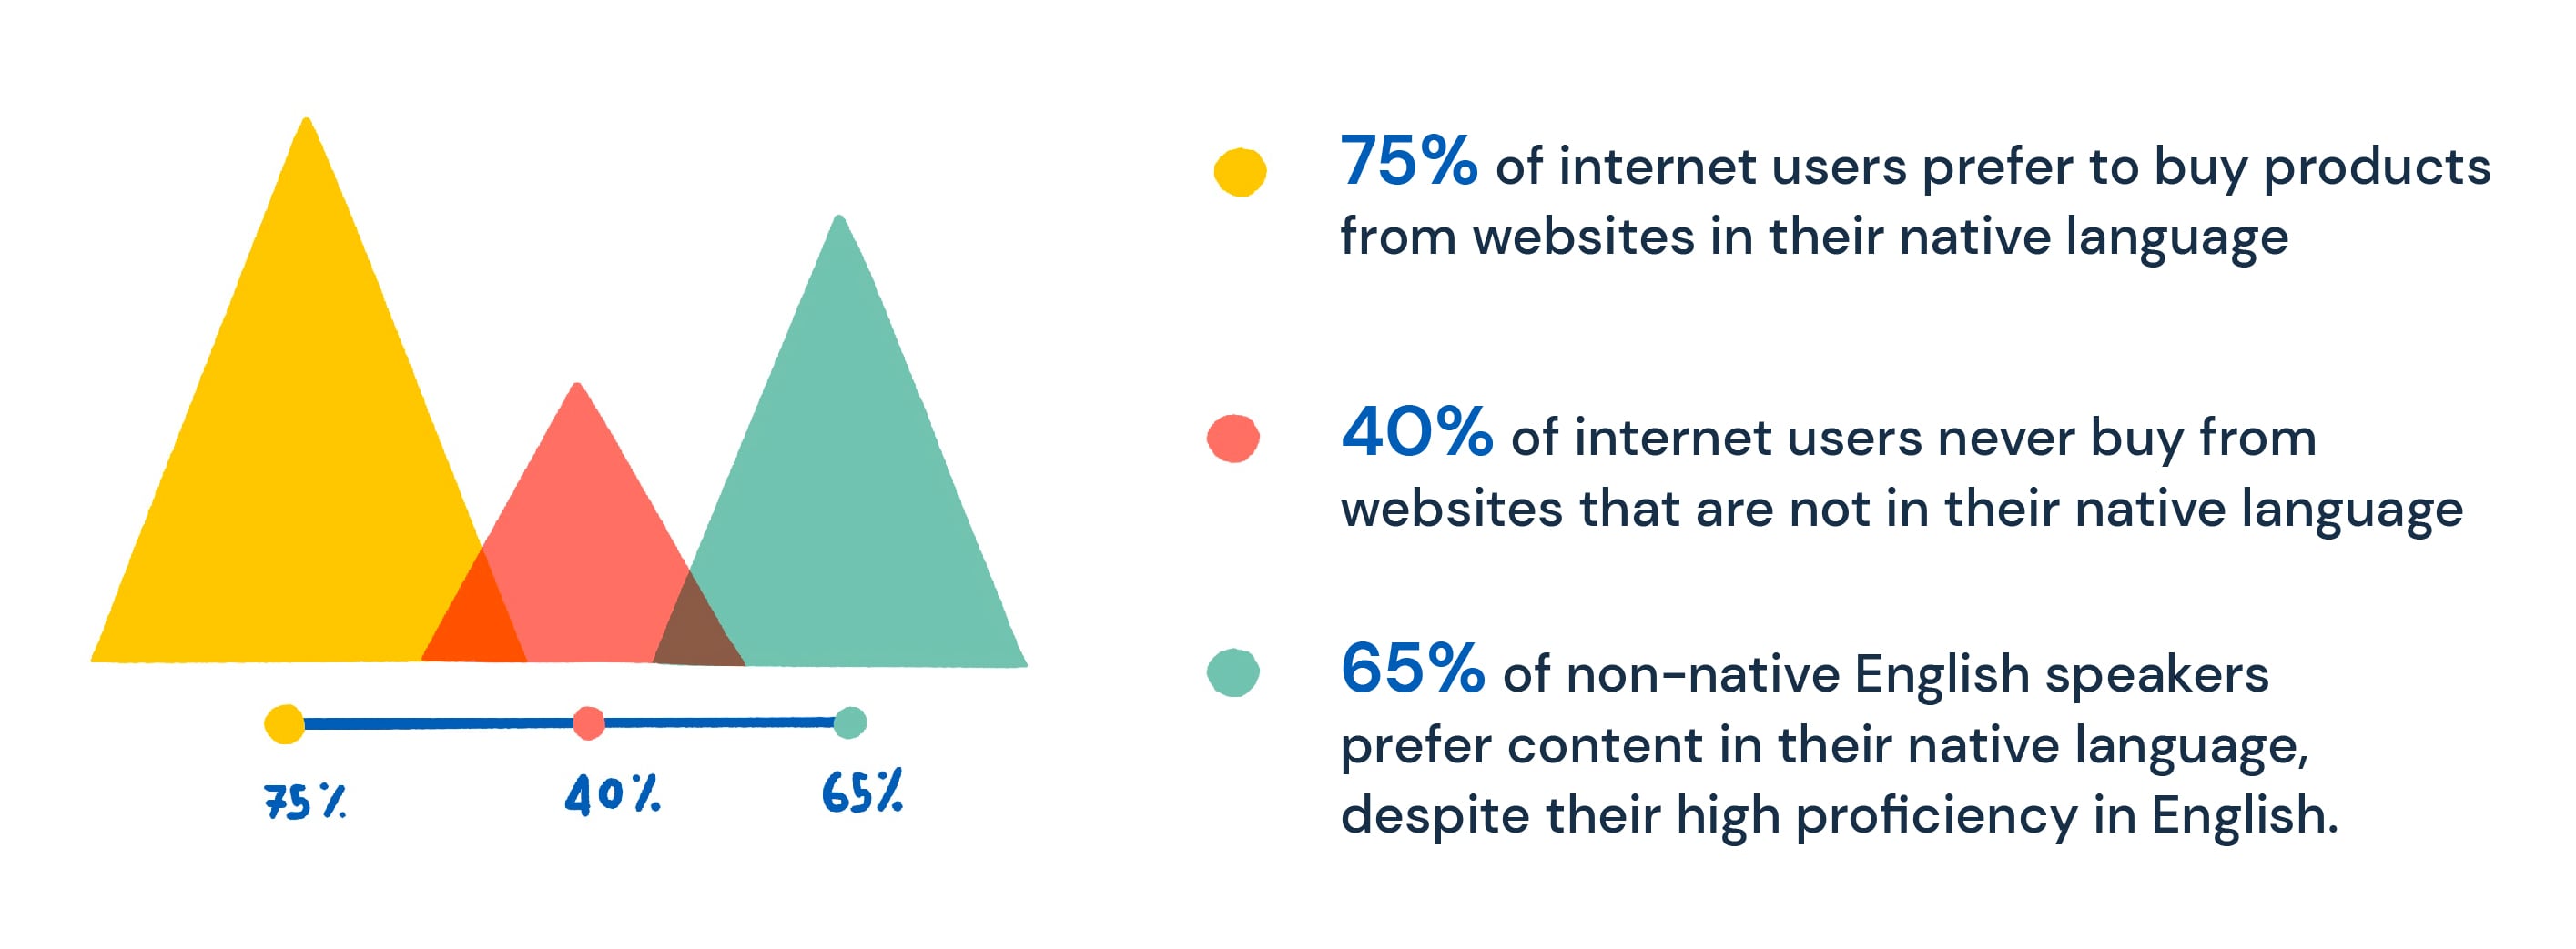 a pie chart showing the percentage of internet users